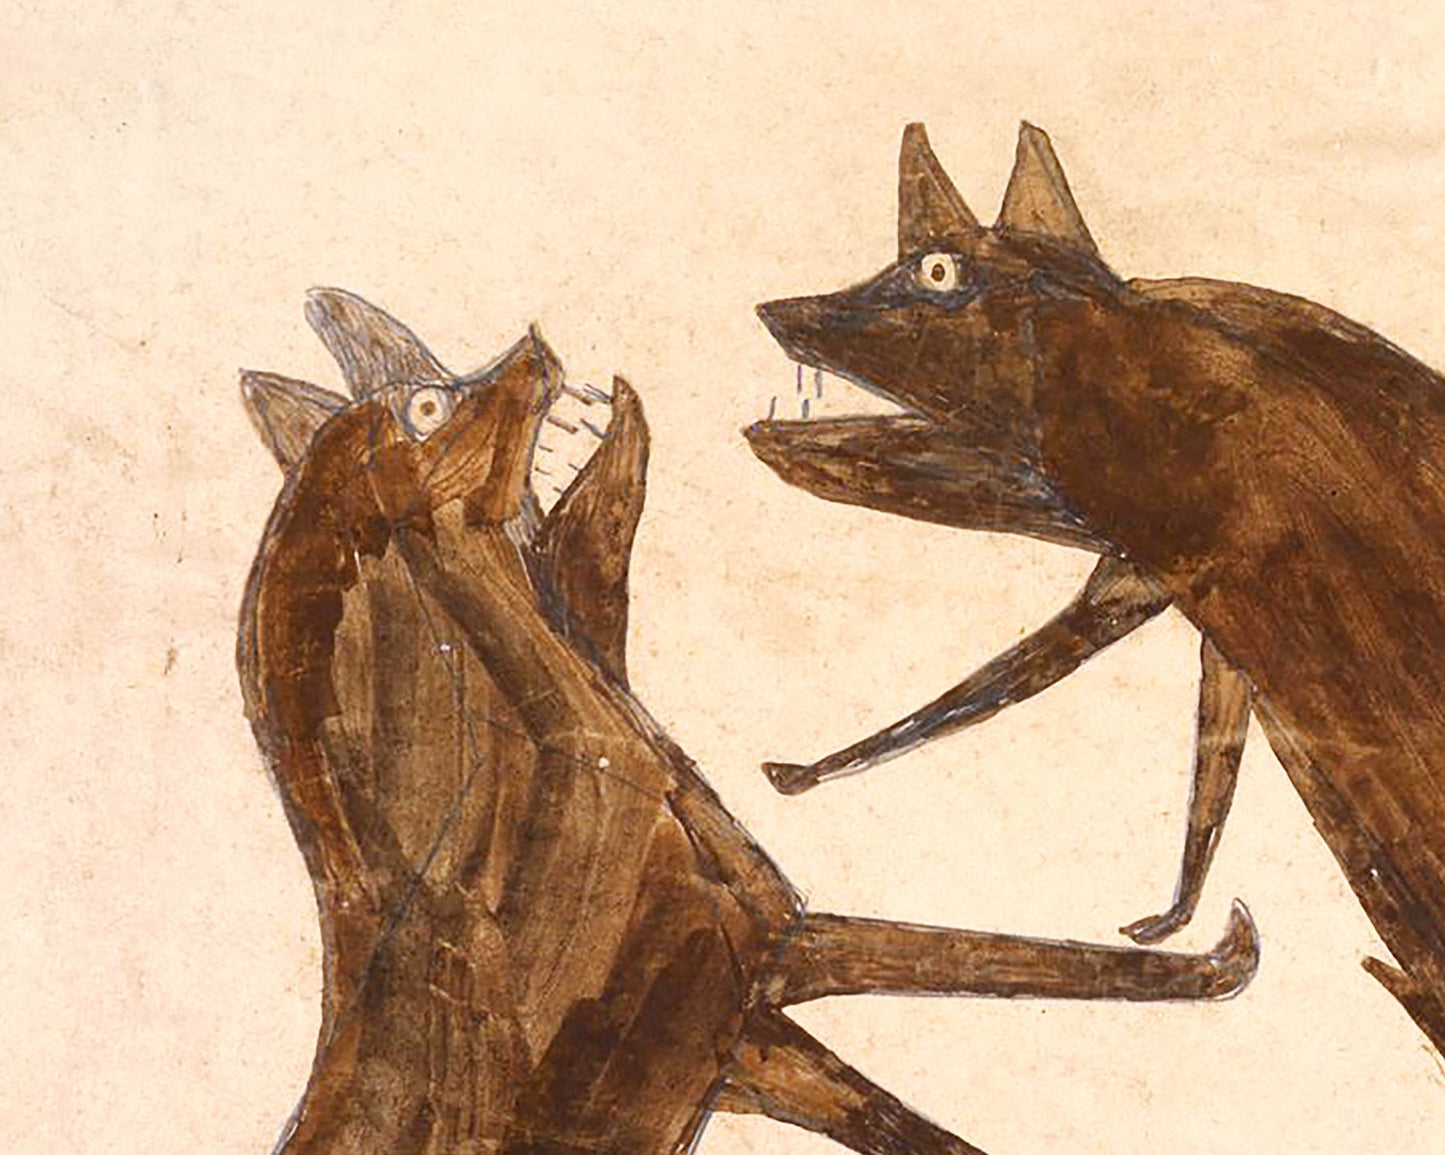 Bill Traylor Americana art | Two brown dogs fighting | Animal folk art | African American self-taught artist | Modern vintage wall décor